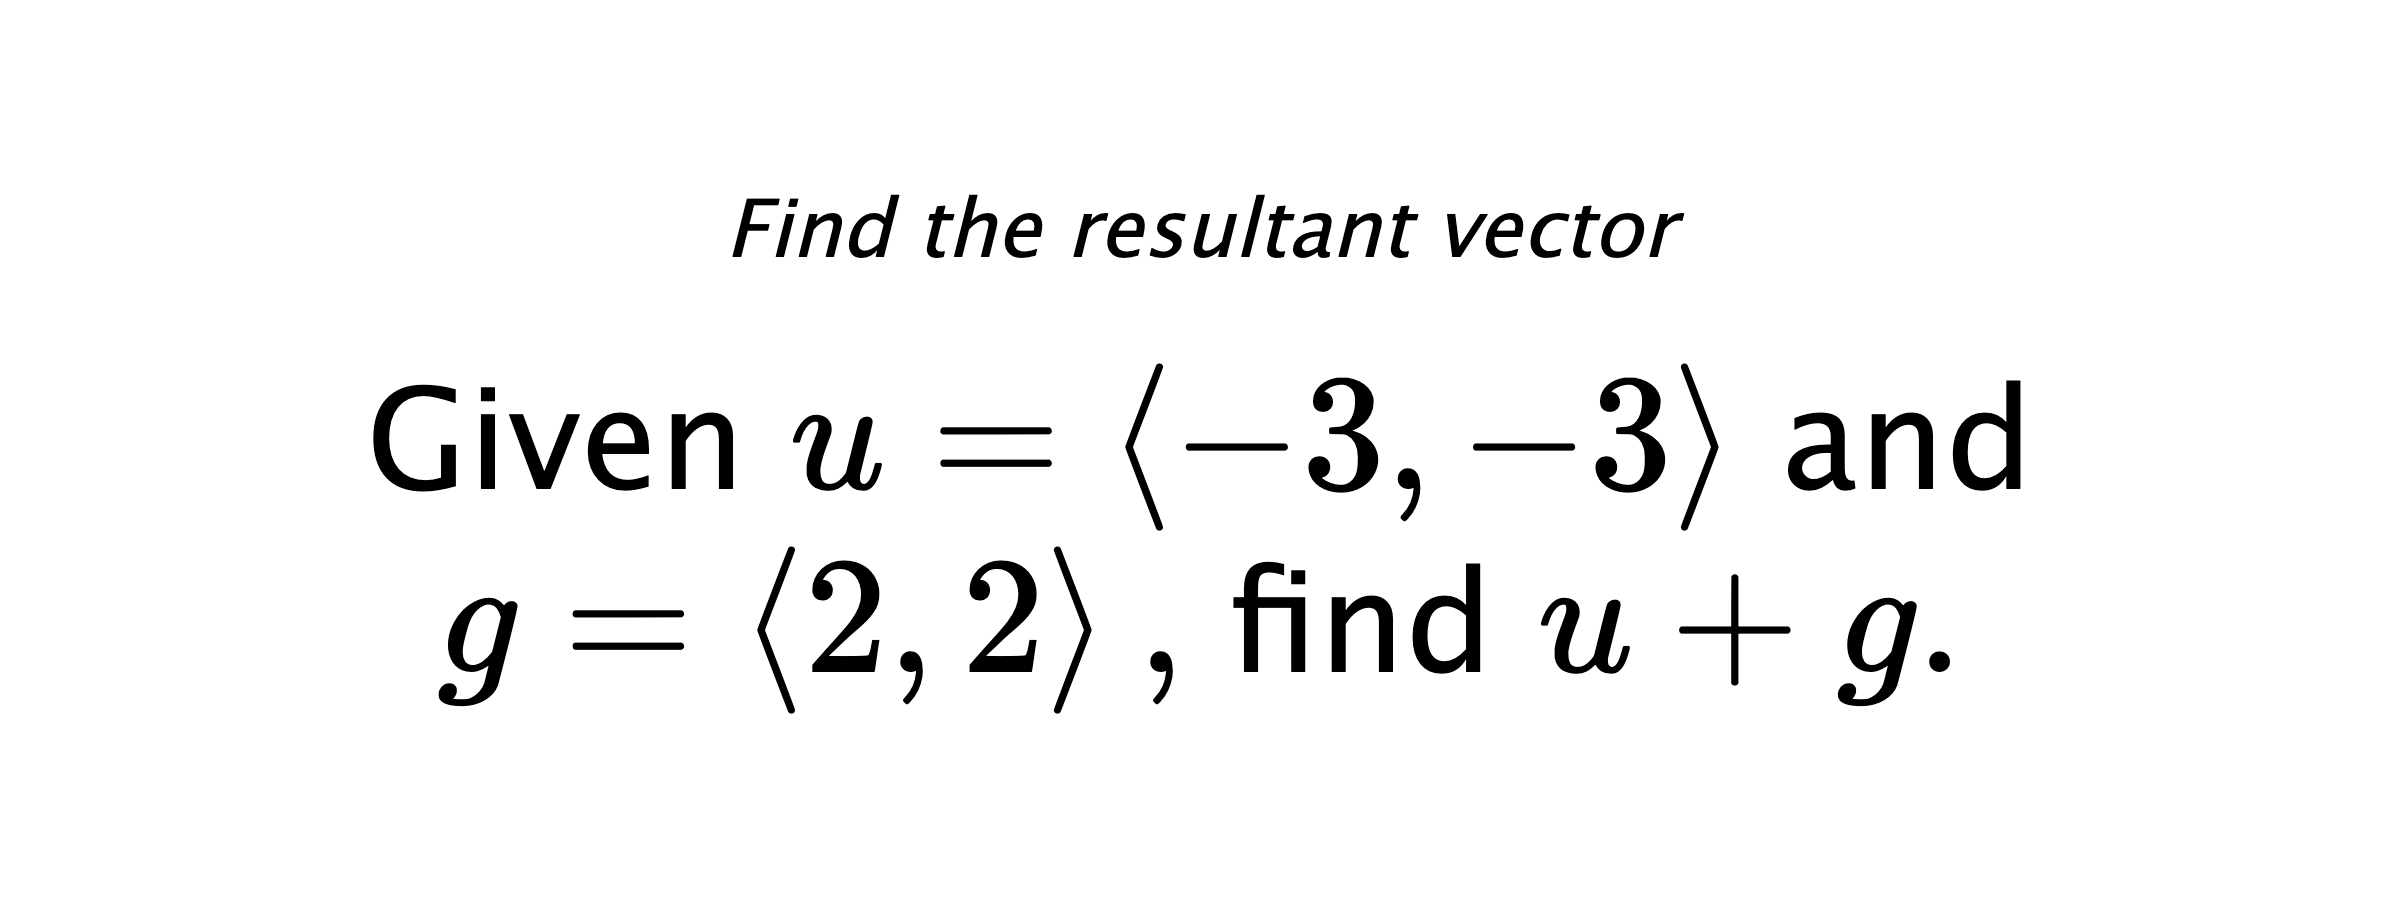 Find the resultant vector Given $ u = \left< -3,-3 \right> $ and $ g = \left< 2,2 \right> ,$ find $ u+g .$